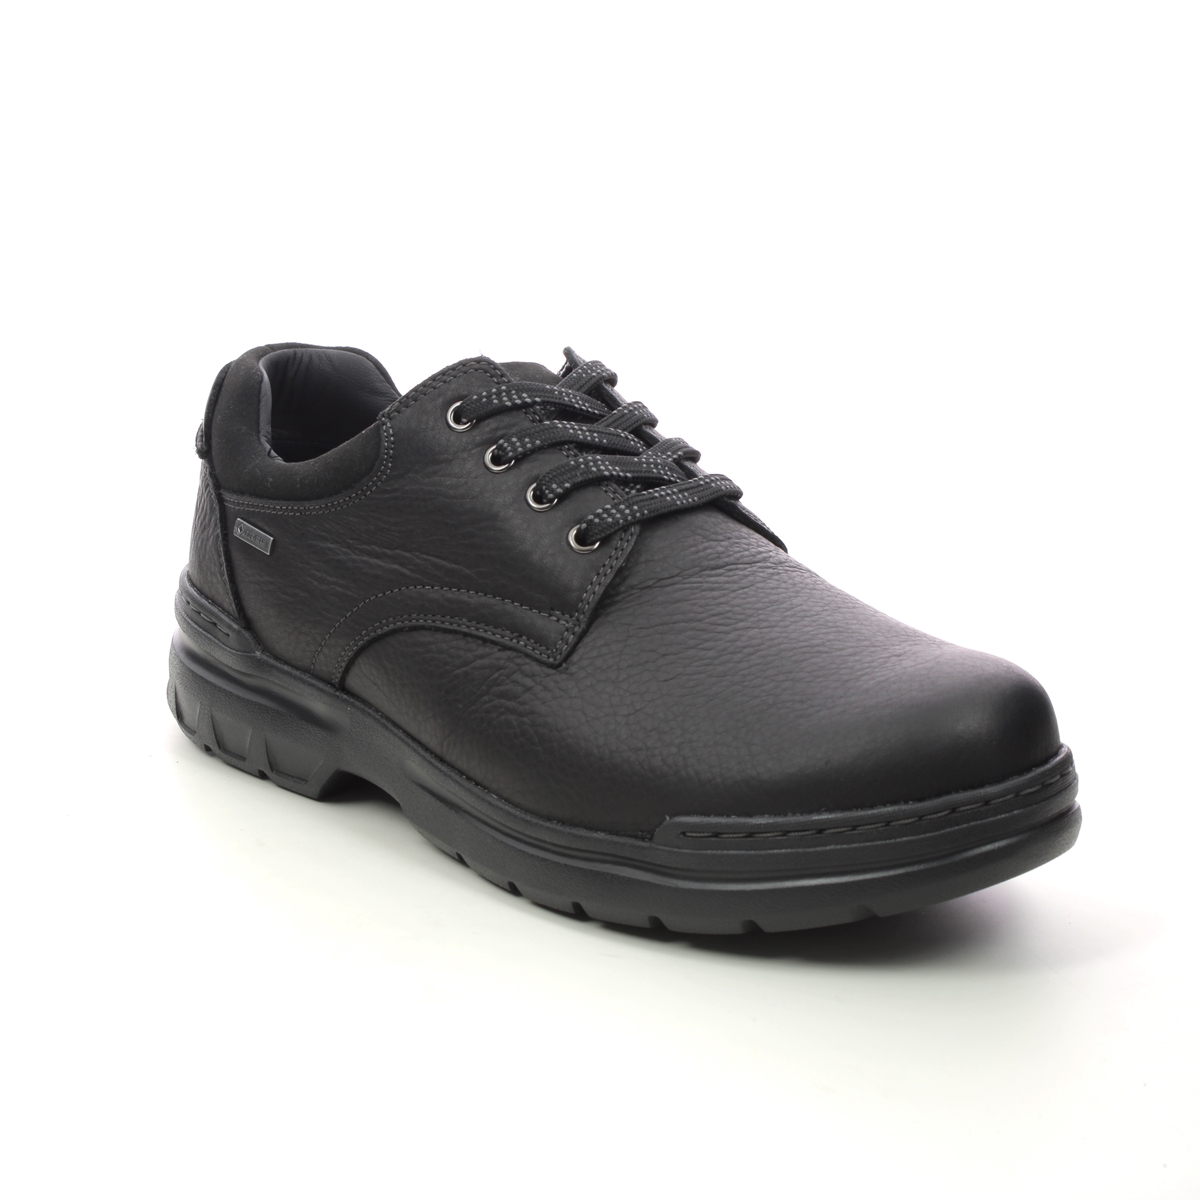 Clarks Rockie Walk Gtx Black Leather Mens Comfort Shoes 734648H In Size 11 In Plain Black Leather H Width Fitting Extra Wide